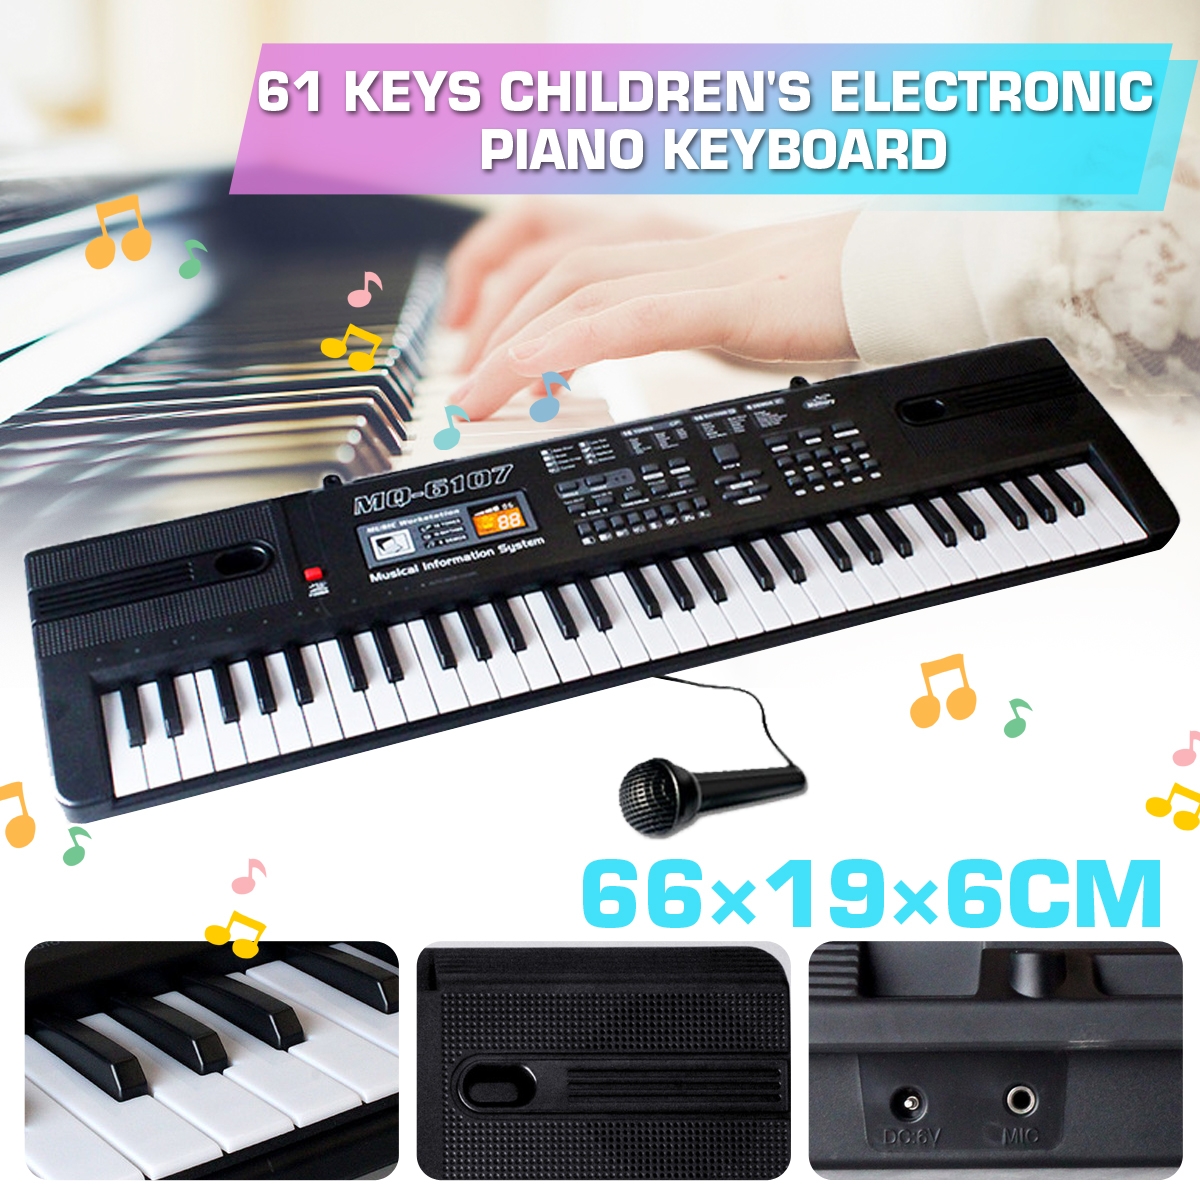 61 Keys Children's Electronic Piano Keyboard Double Horn Stereo Sound with Microphone